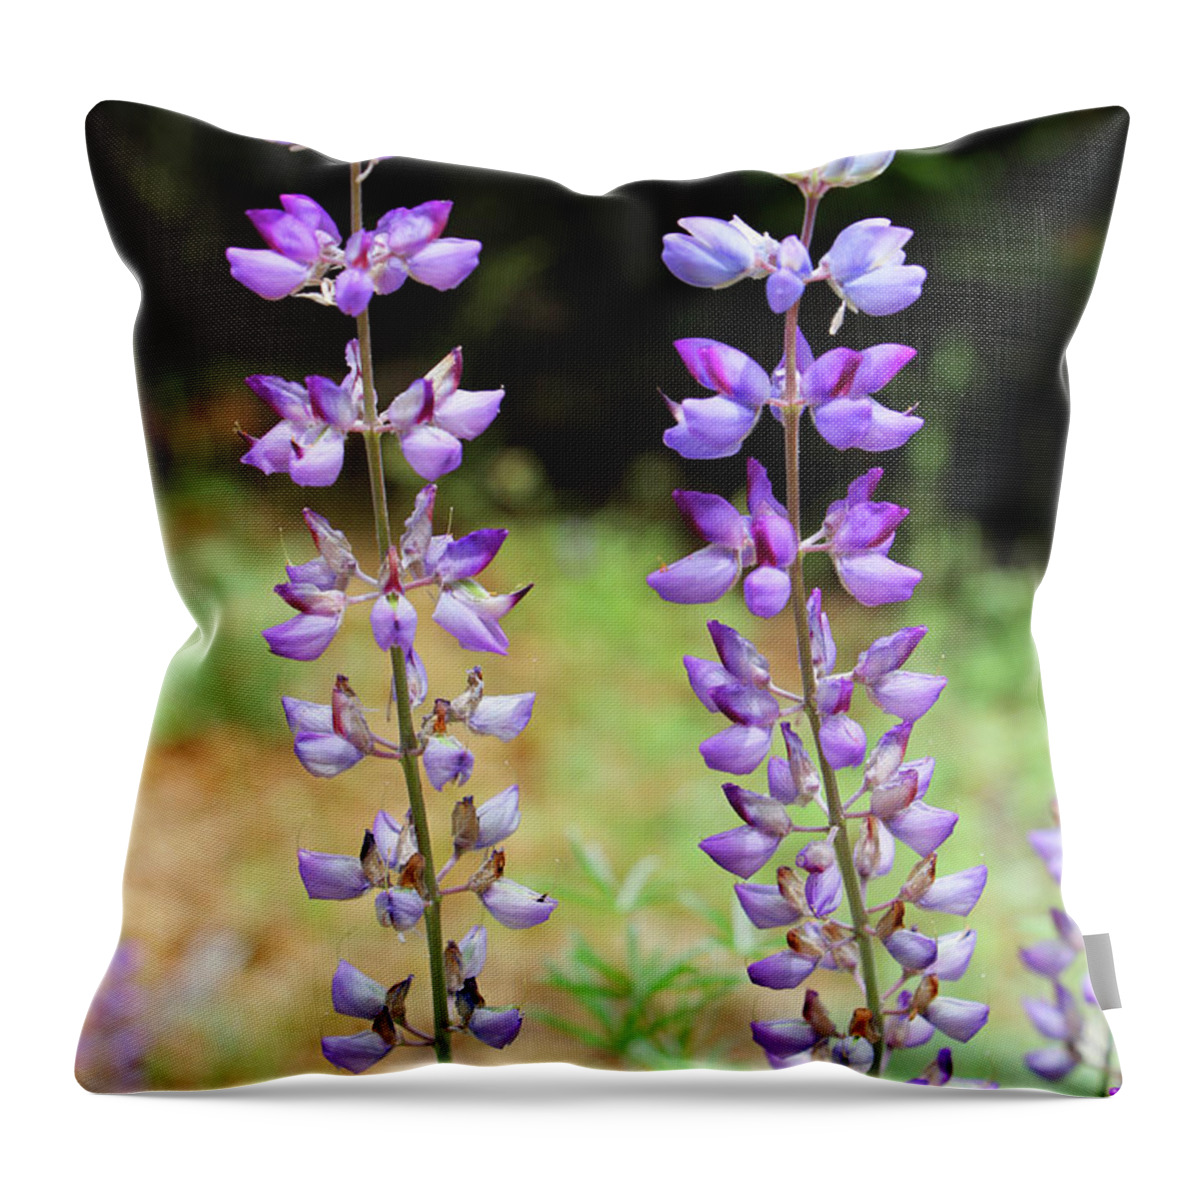 Lupine Throw Pillow featuring the photograph Lupine by Sierra Vance